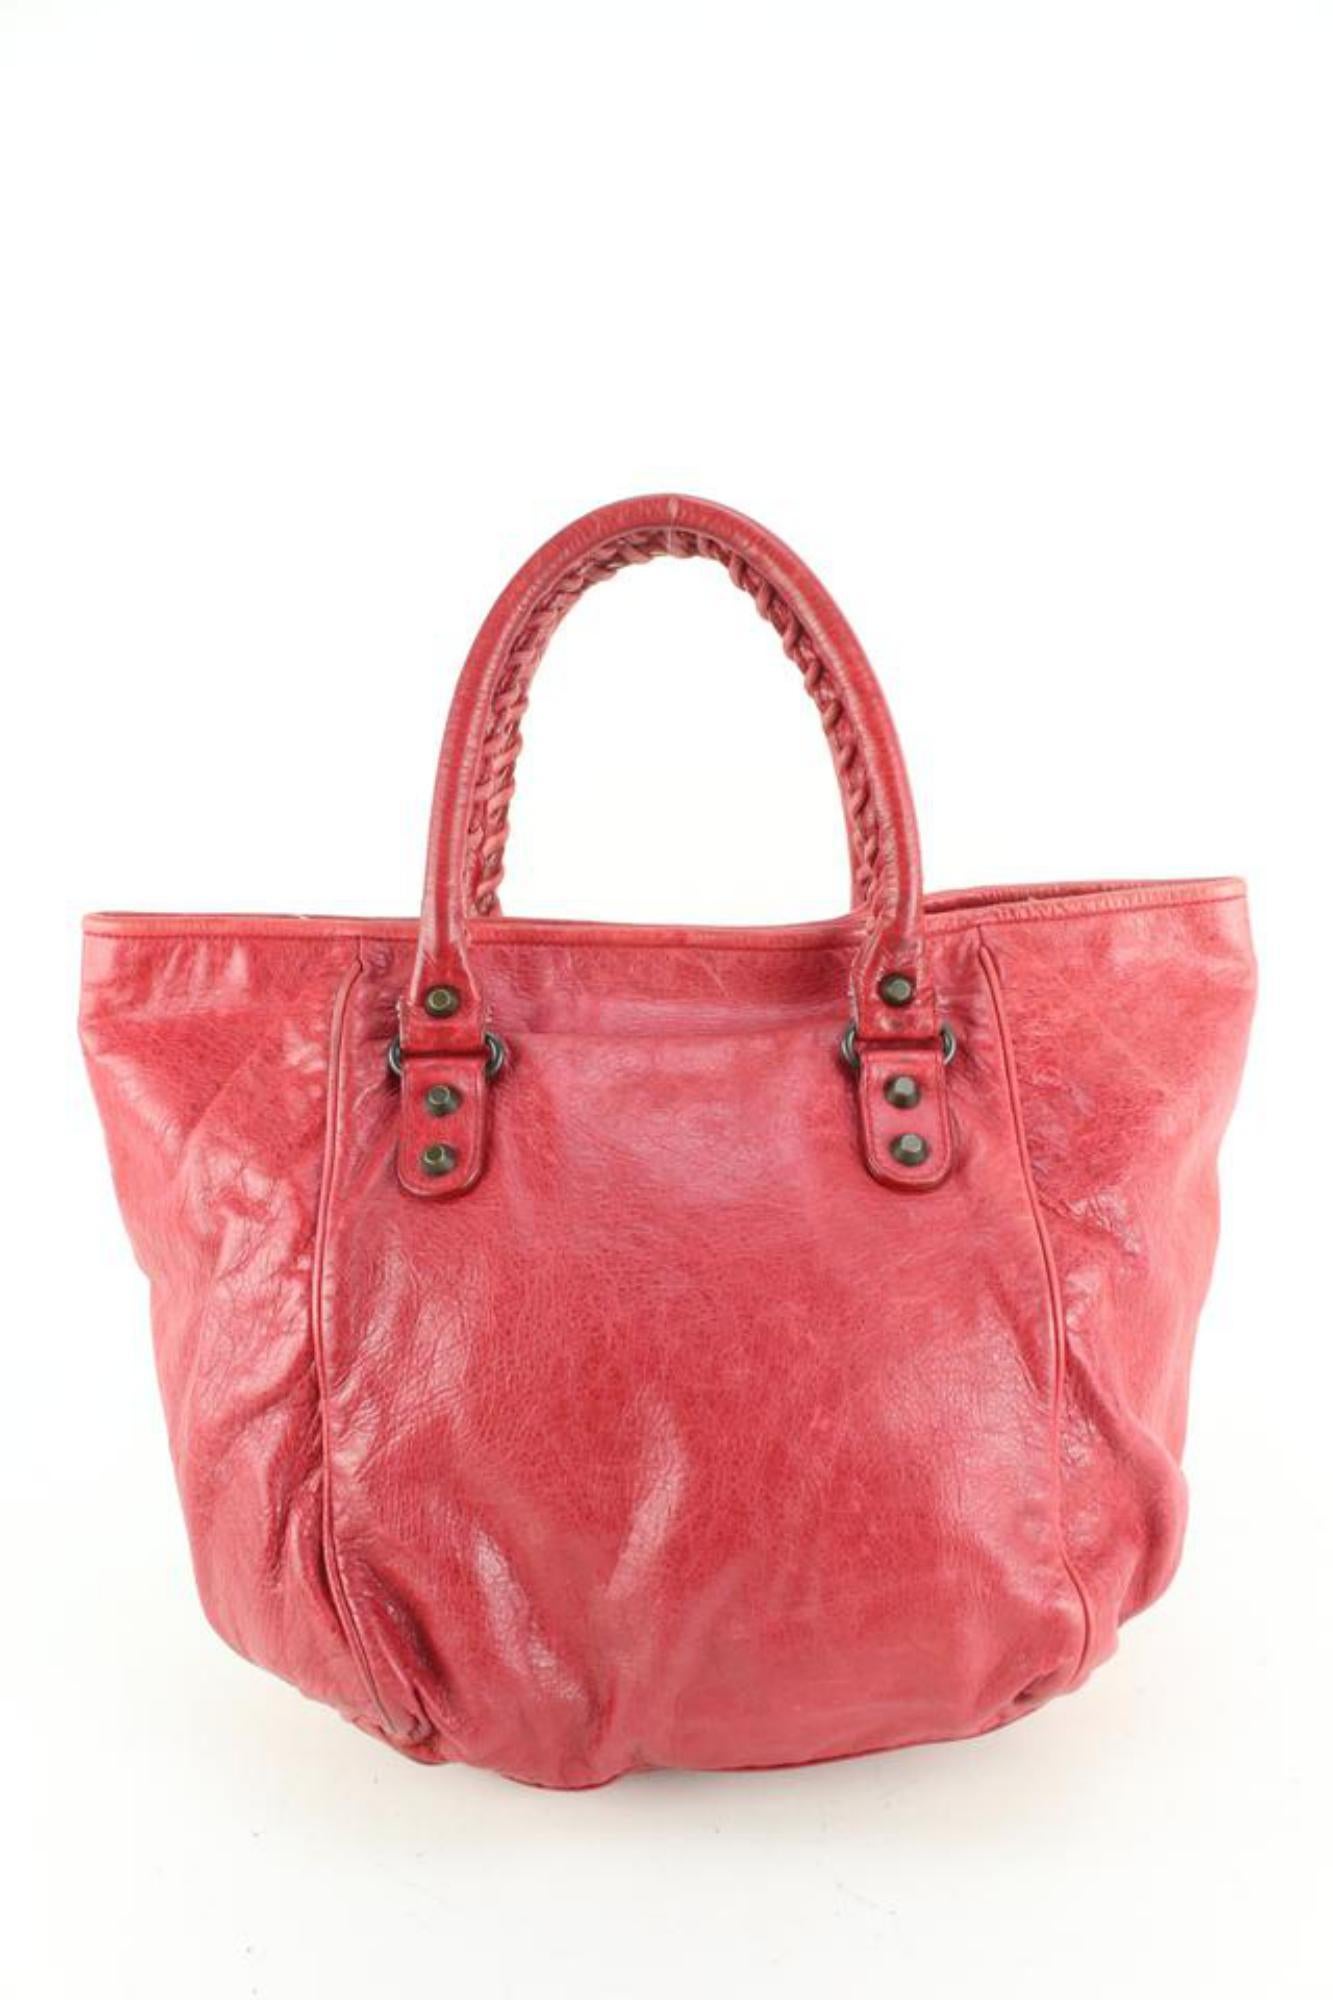 Balenciaga Red Sang Lambskin Leather S Sunday Tote 98ba52s For Sale 4